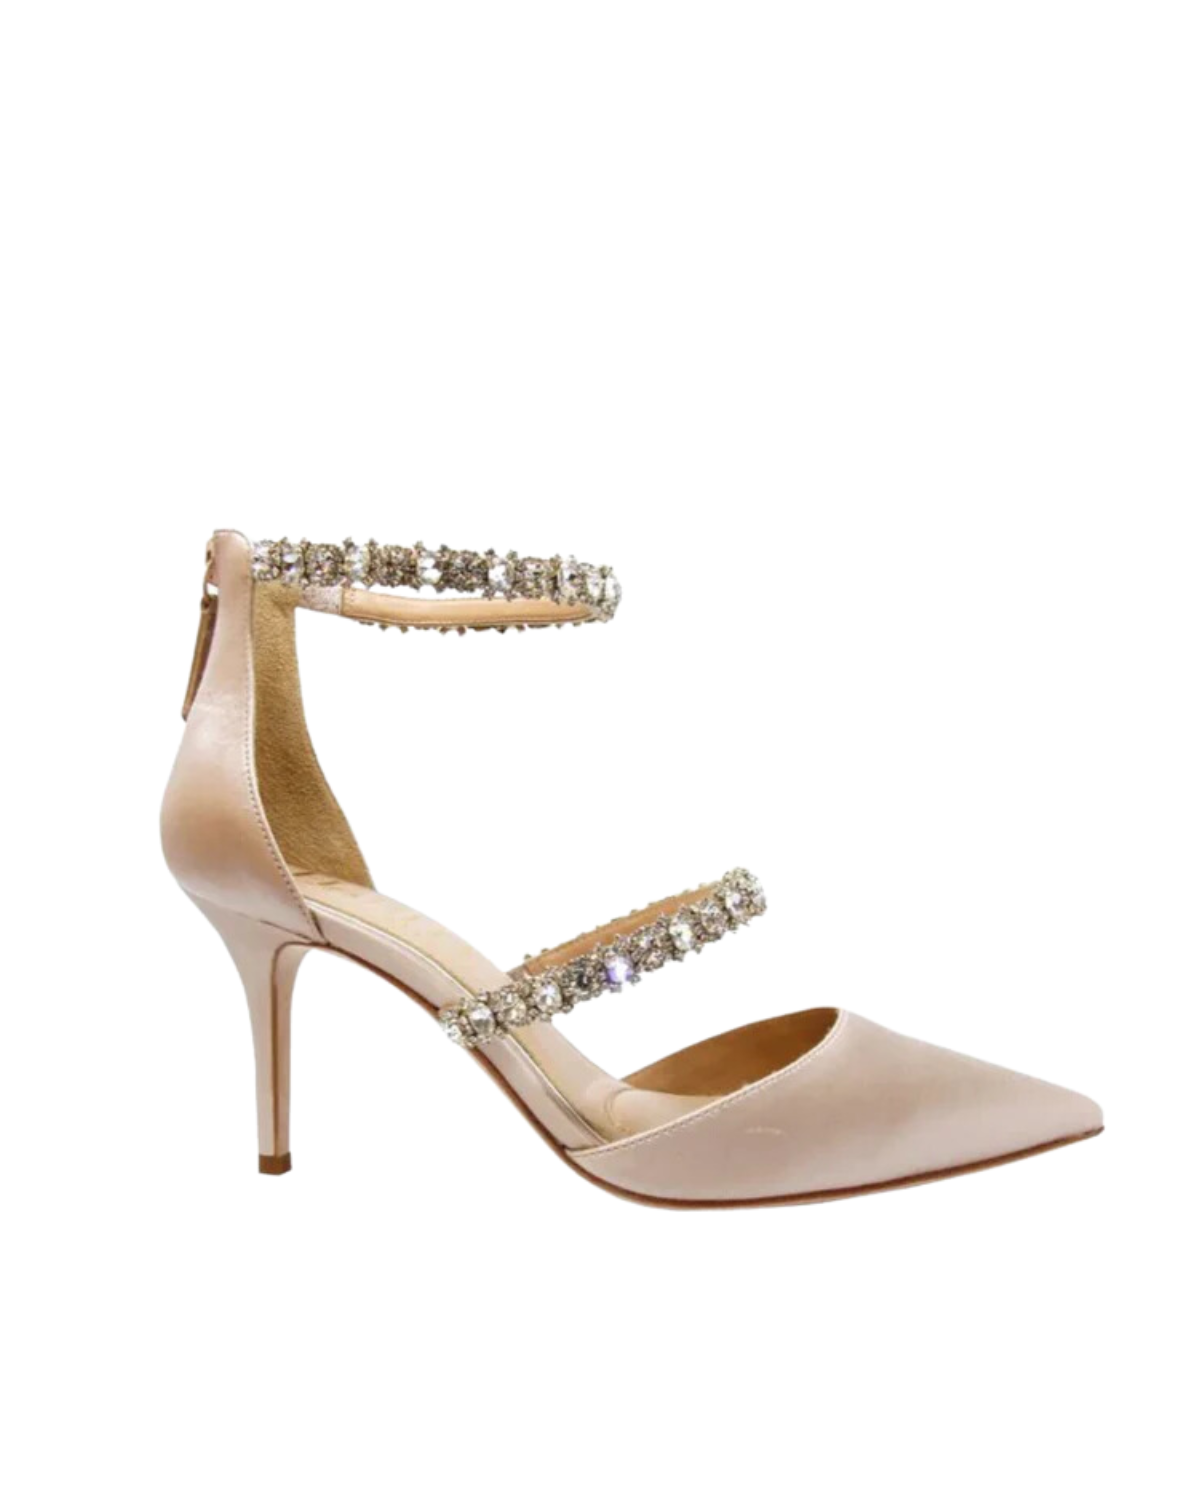 Mid Heel Wedding Shoes for Brides - Elegant and Comfortable